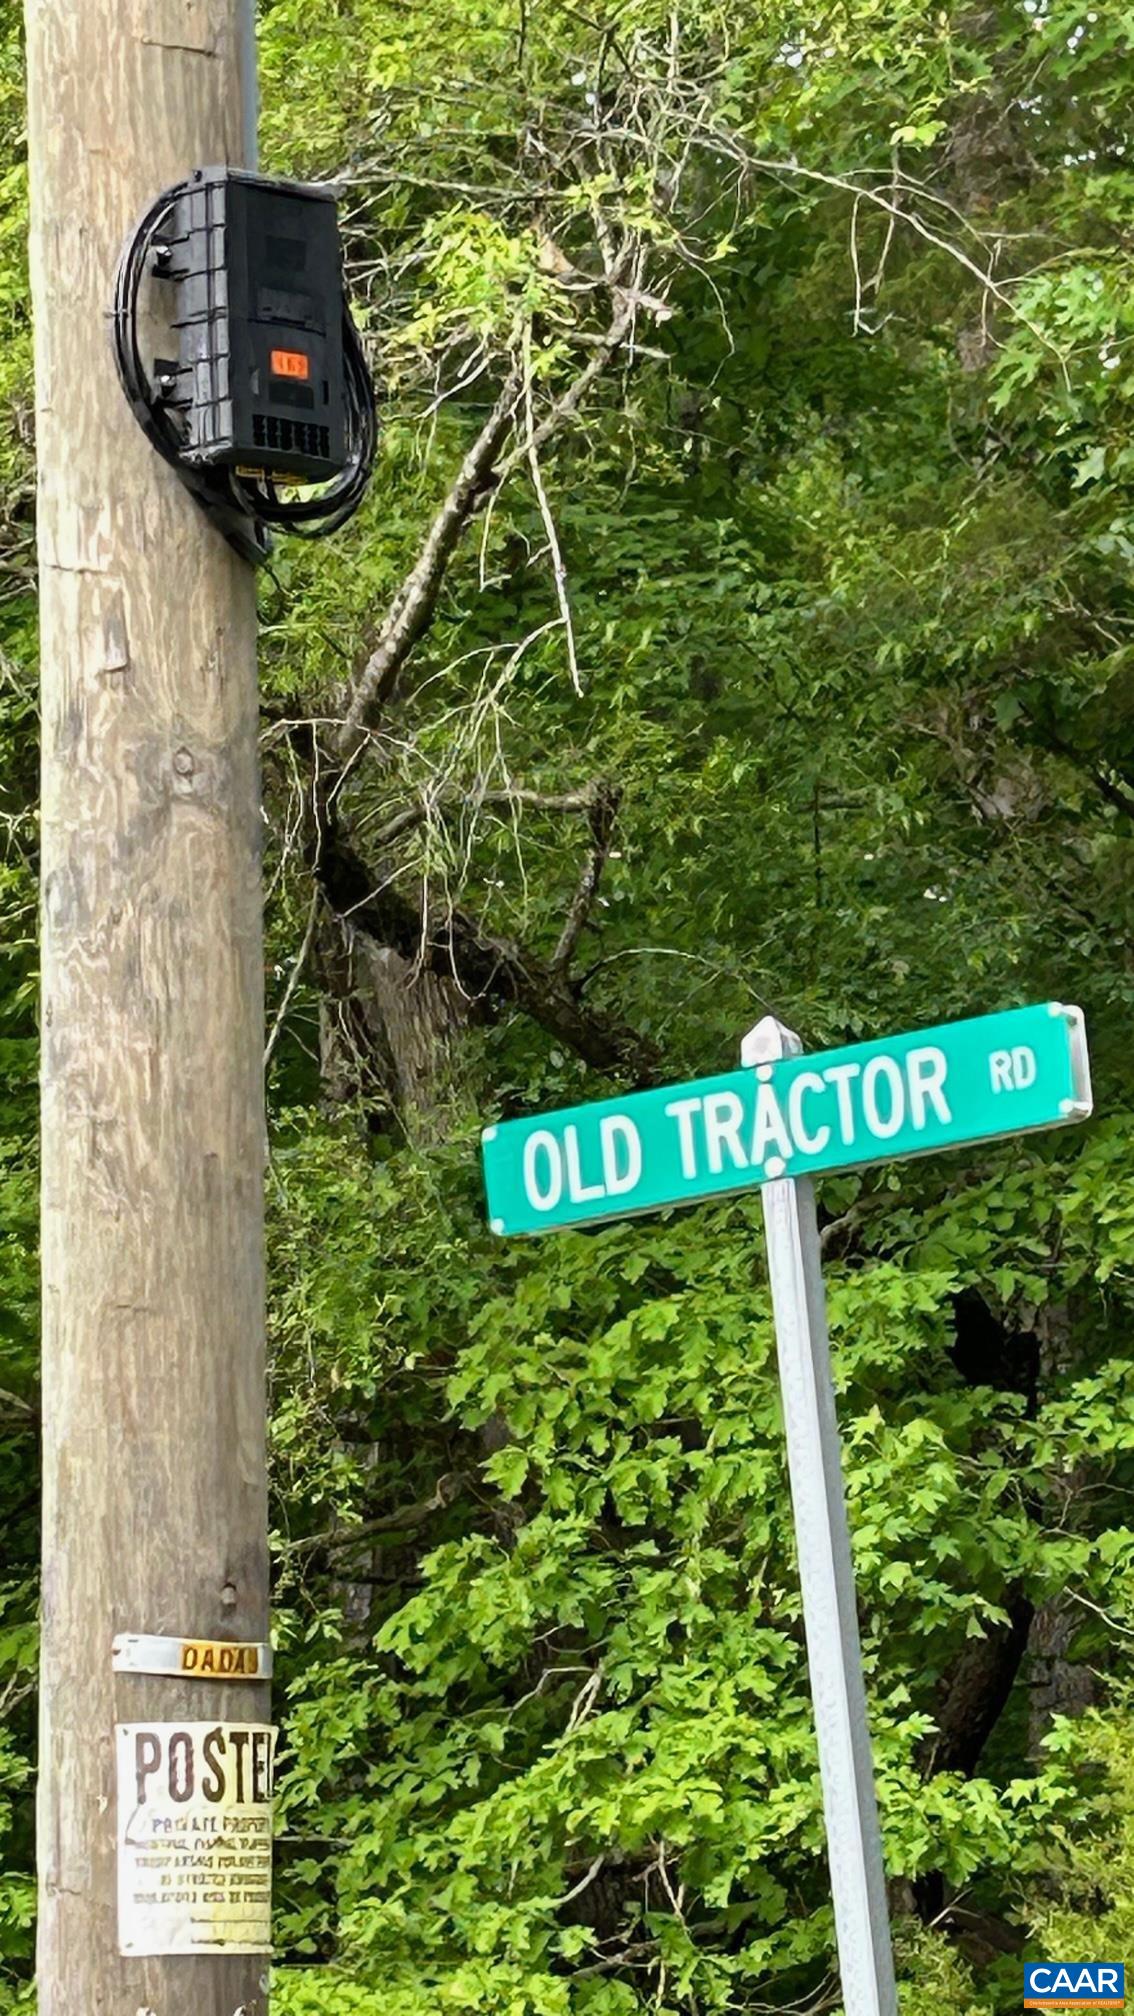 OLD TRACTOR RD Tax Map 22-19-3